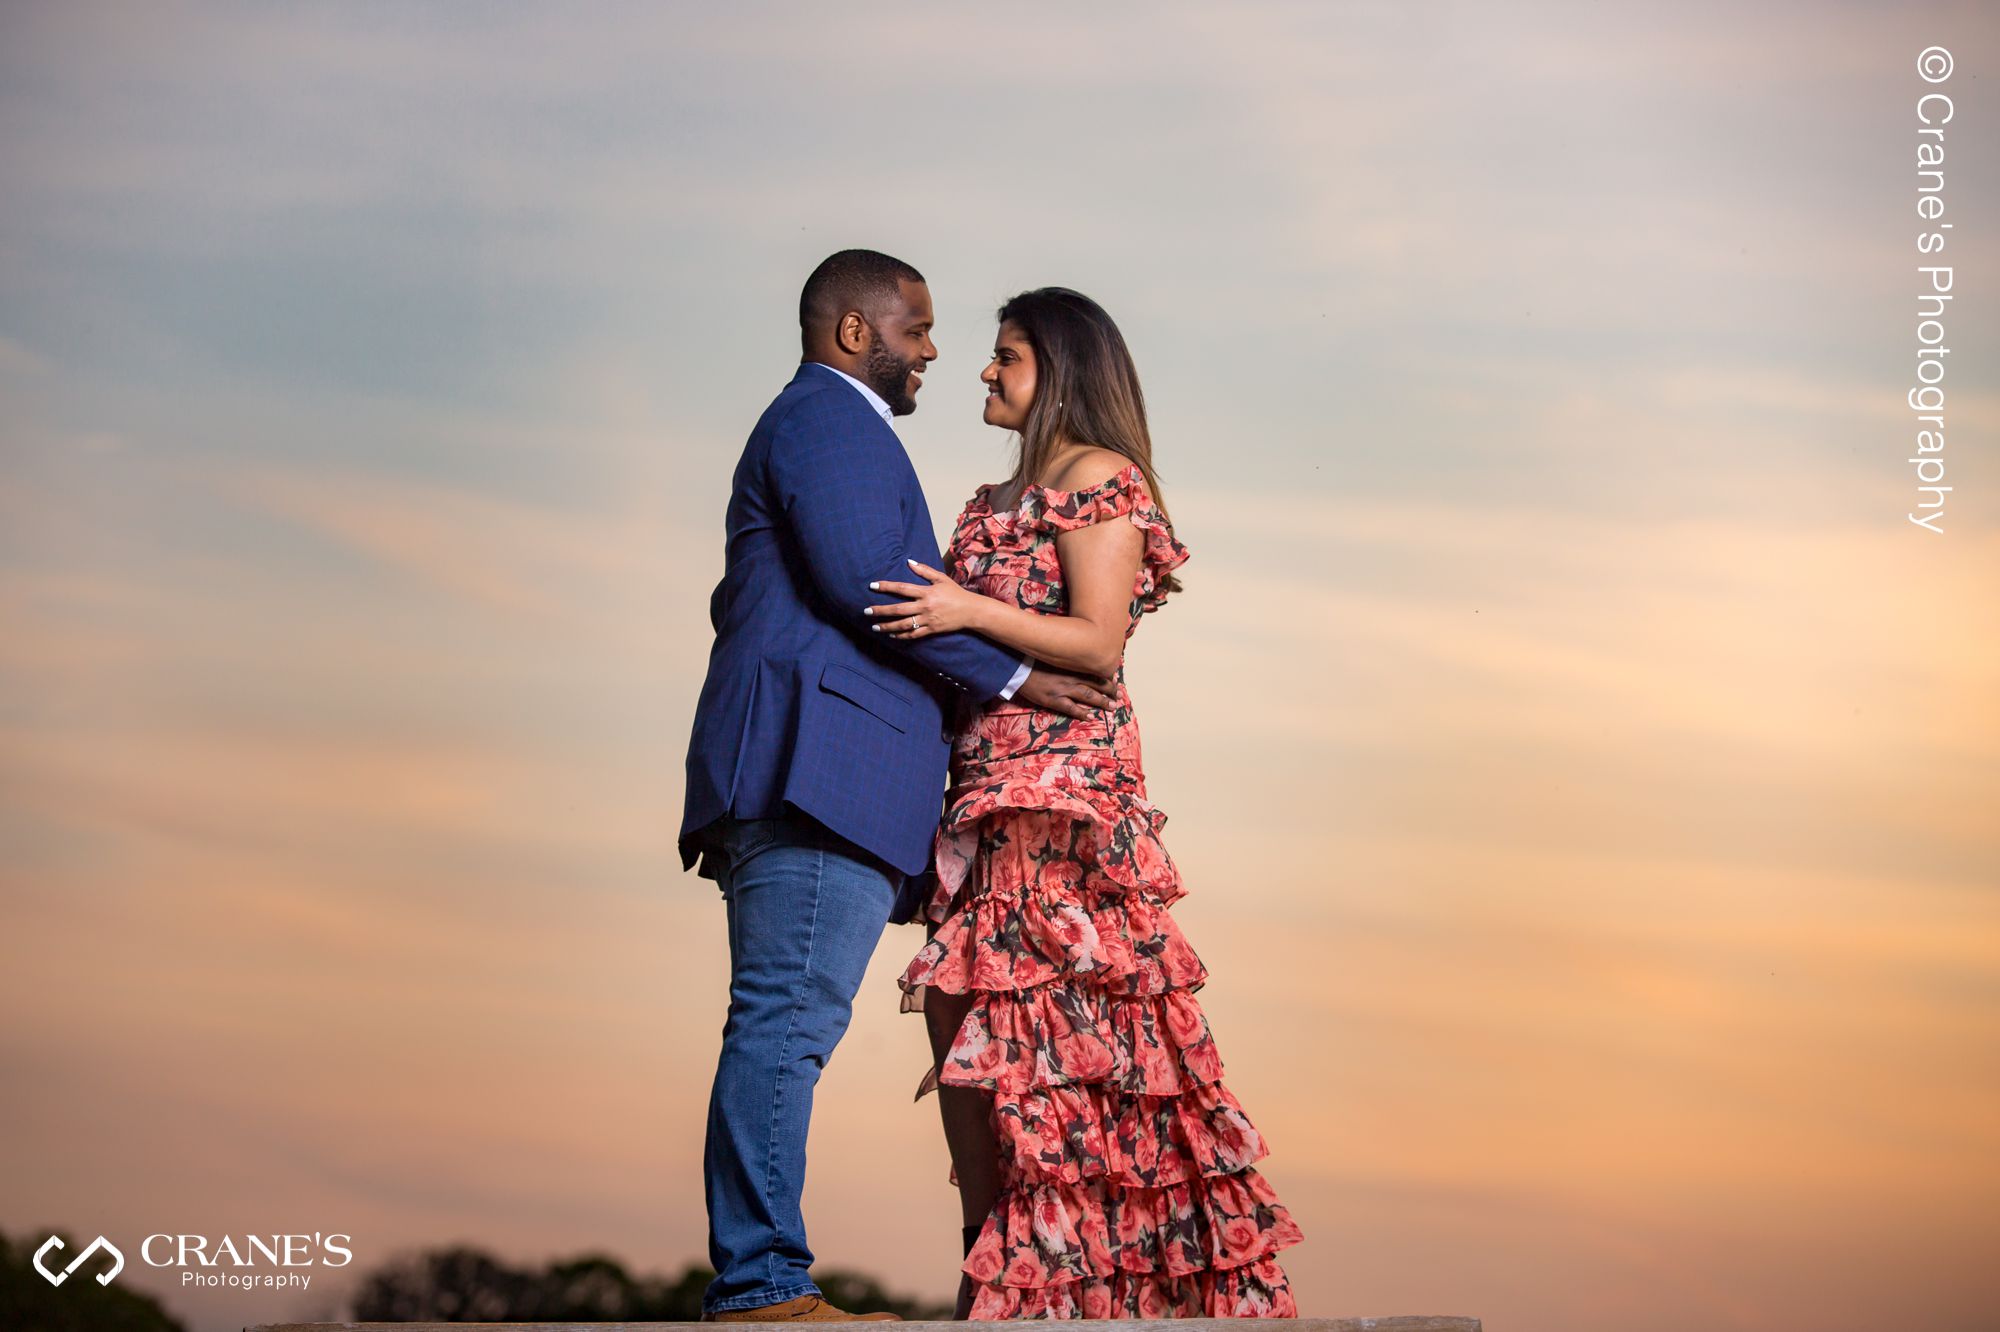 A posed image of a couple with a setting sky in the background